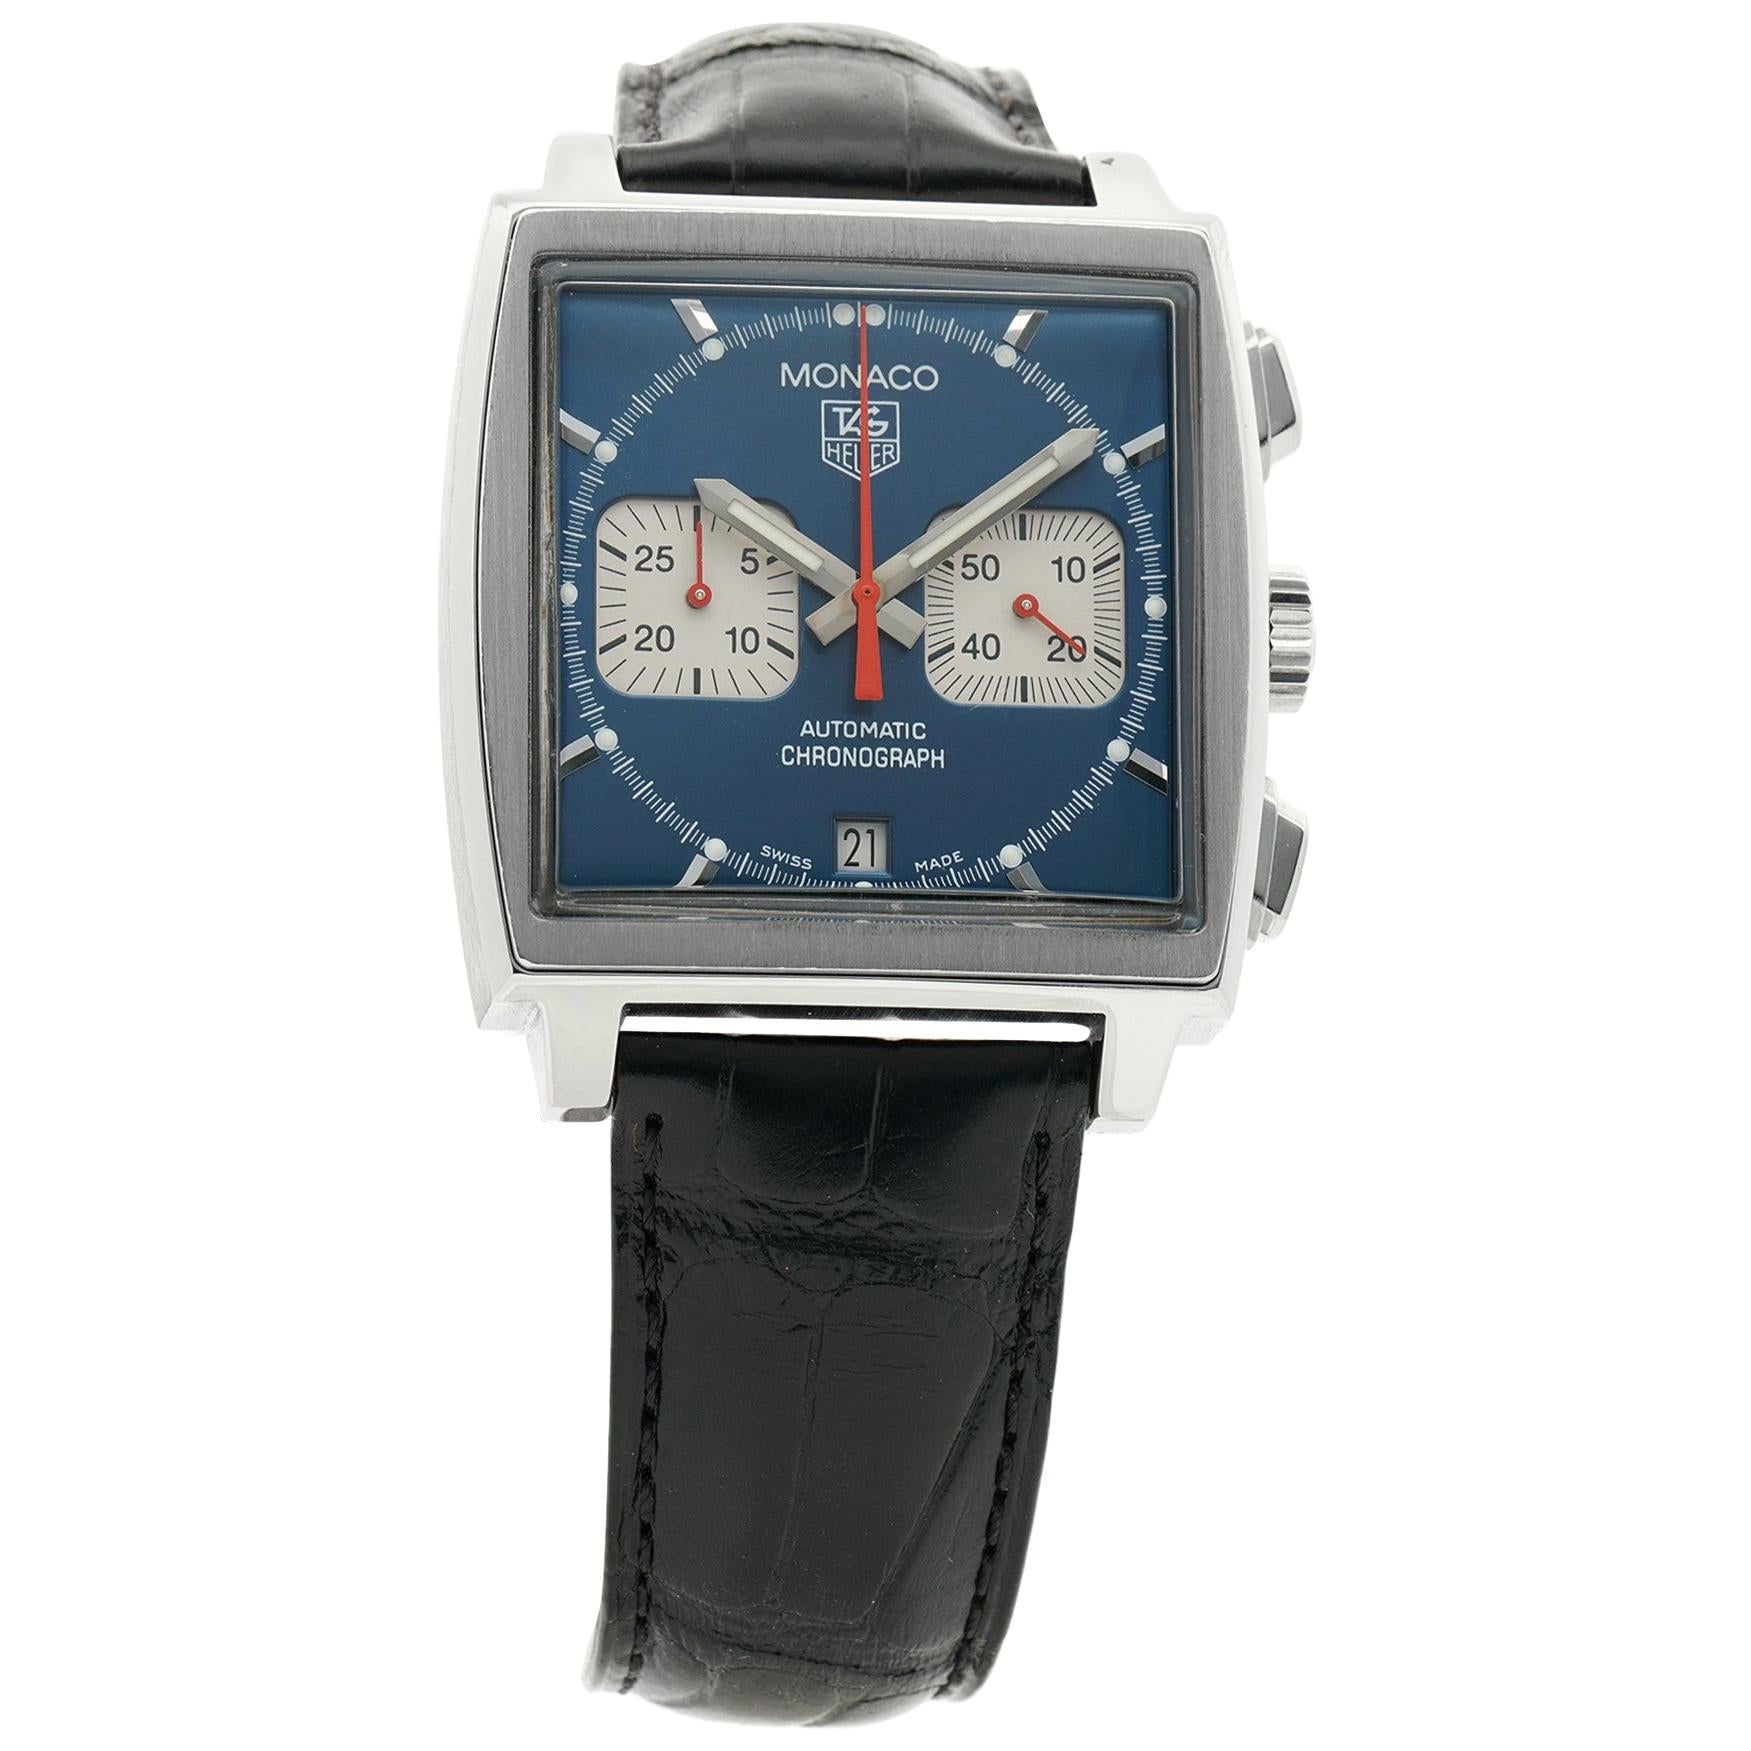 TAG Heuer Monaco CW2113-0, Blue Dial, Certified and Warranty